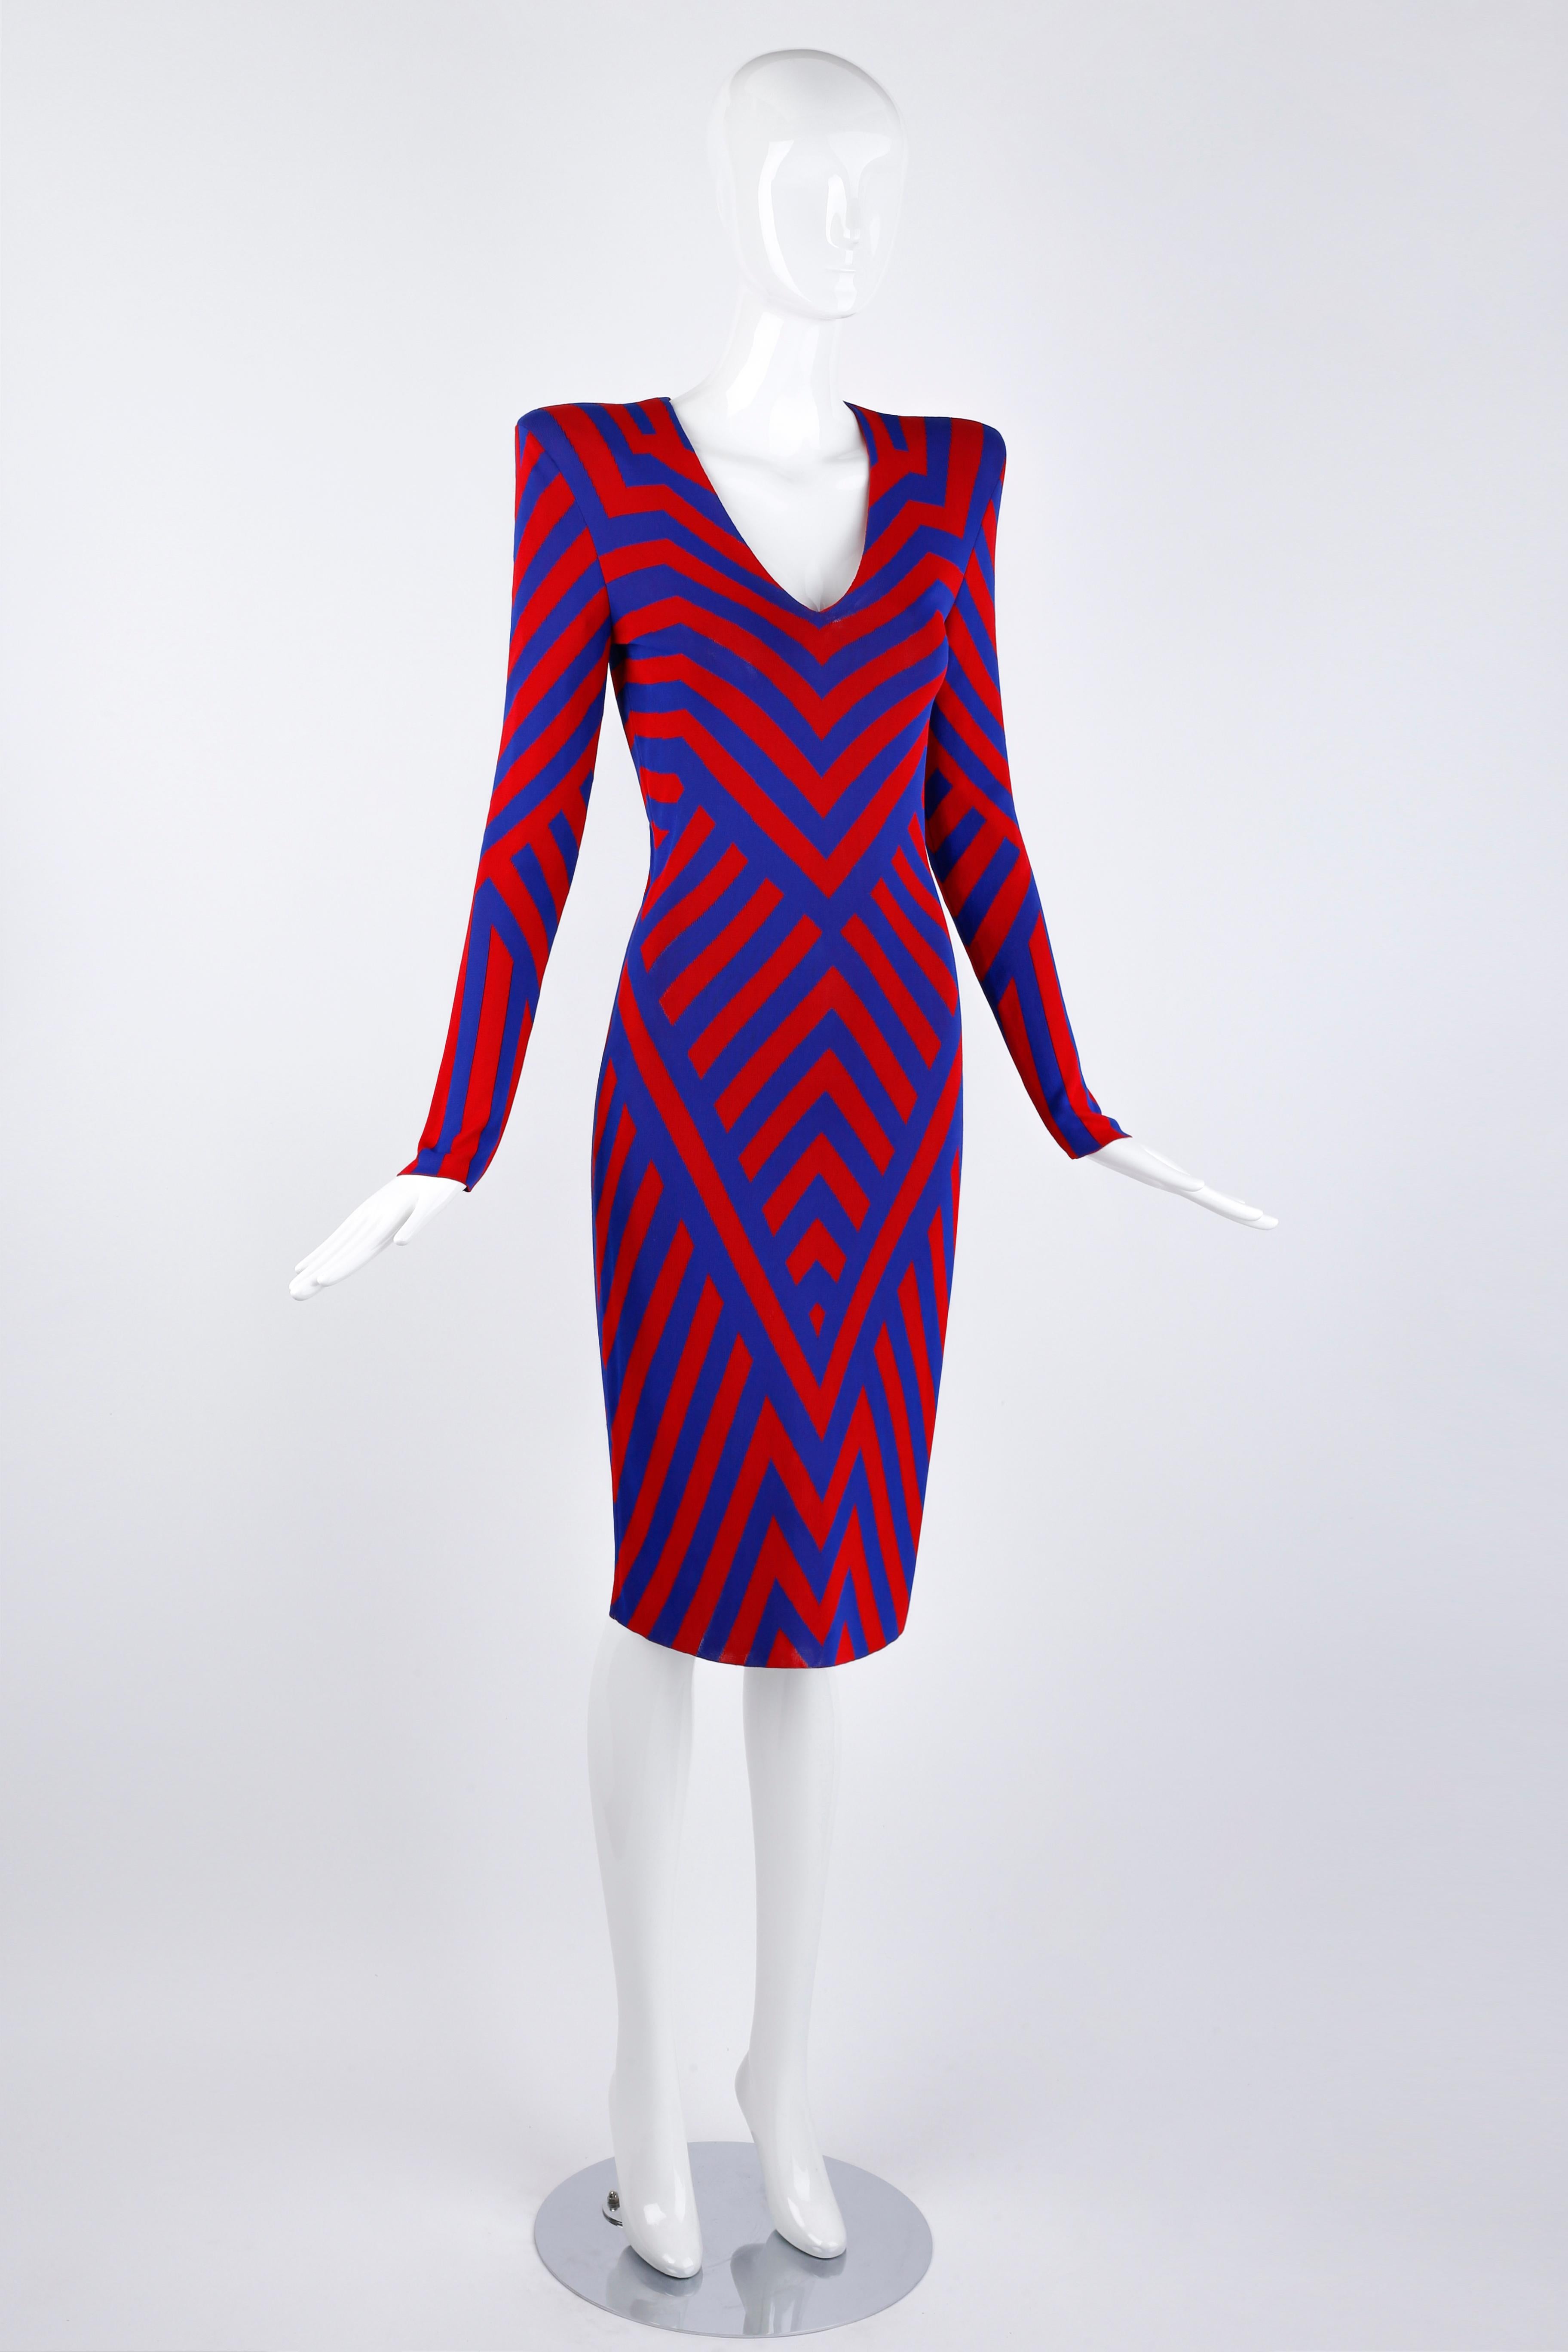 Designed by Alexander McQueen for the Resort 2010 collection, Look #2. This stunning knit sheath dress features an op art style graphic design of contrasting red and blue lines; figure enhancing chevron and diagonal line pattern. Shoulder pads